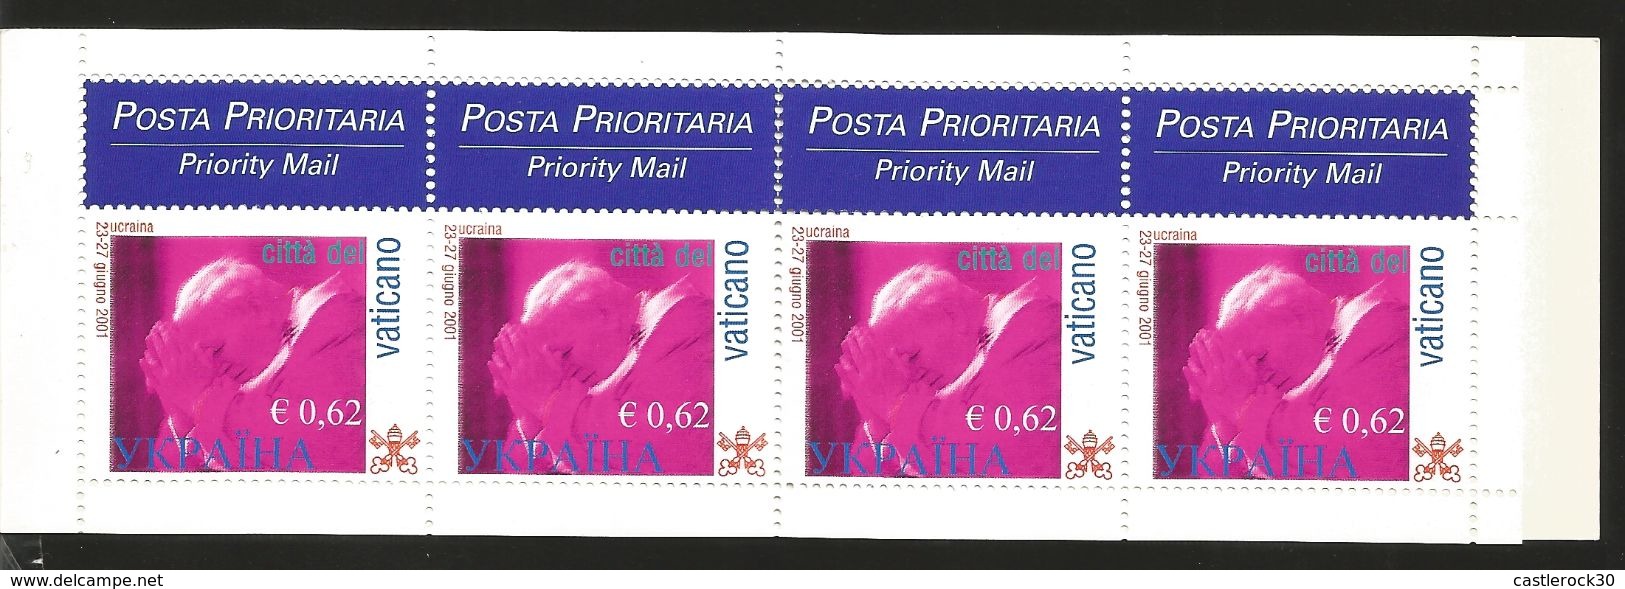 J) 2001 VATICAN CITY, BOOKLET, JOHN PAUL II IN THE WORLD, MNH - Covers & Documents